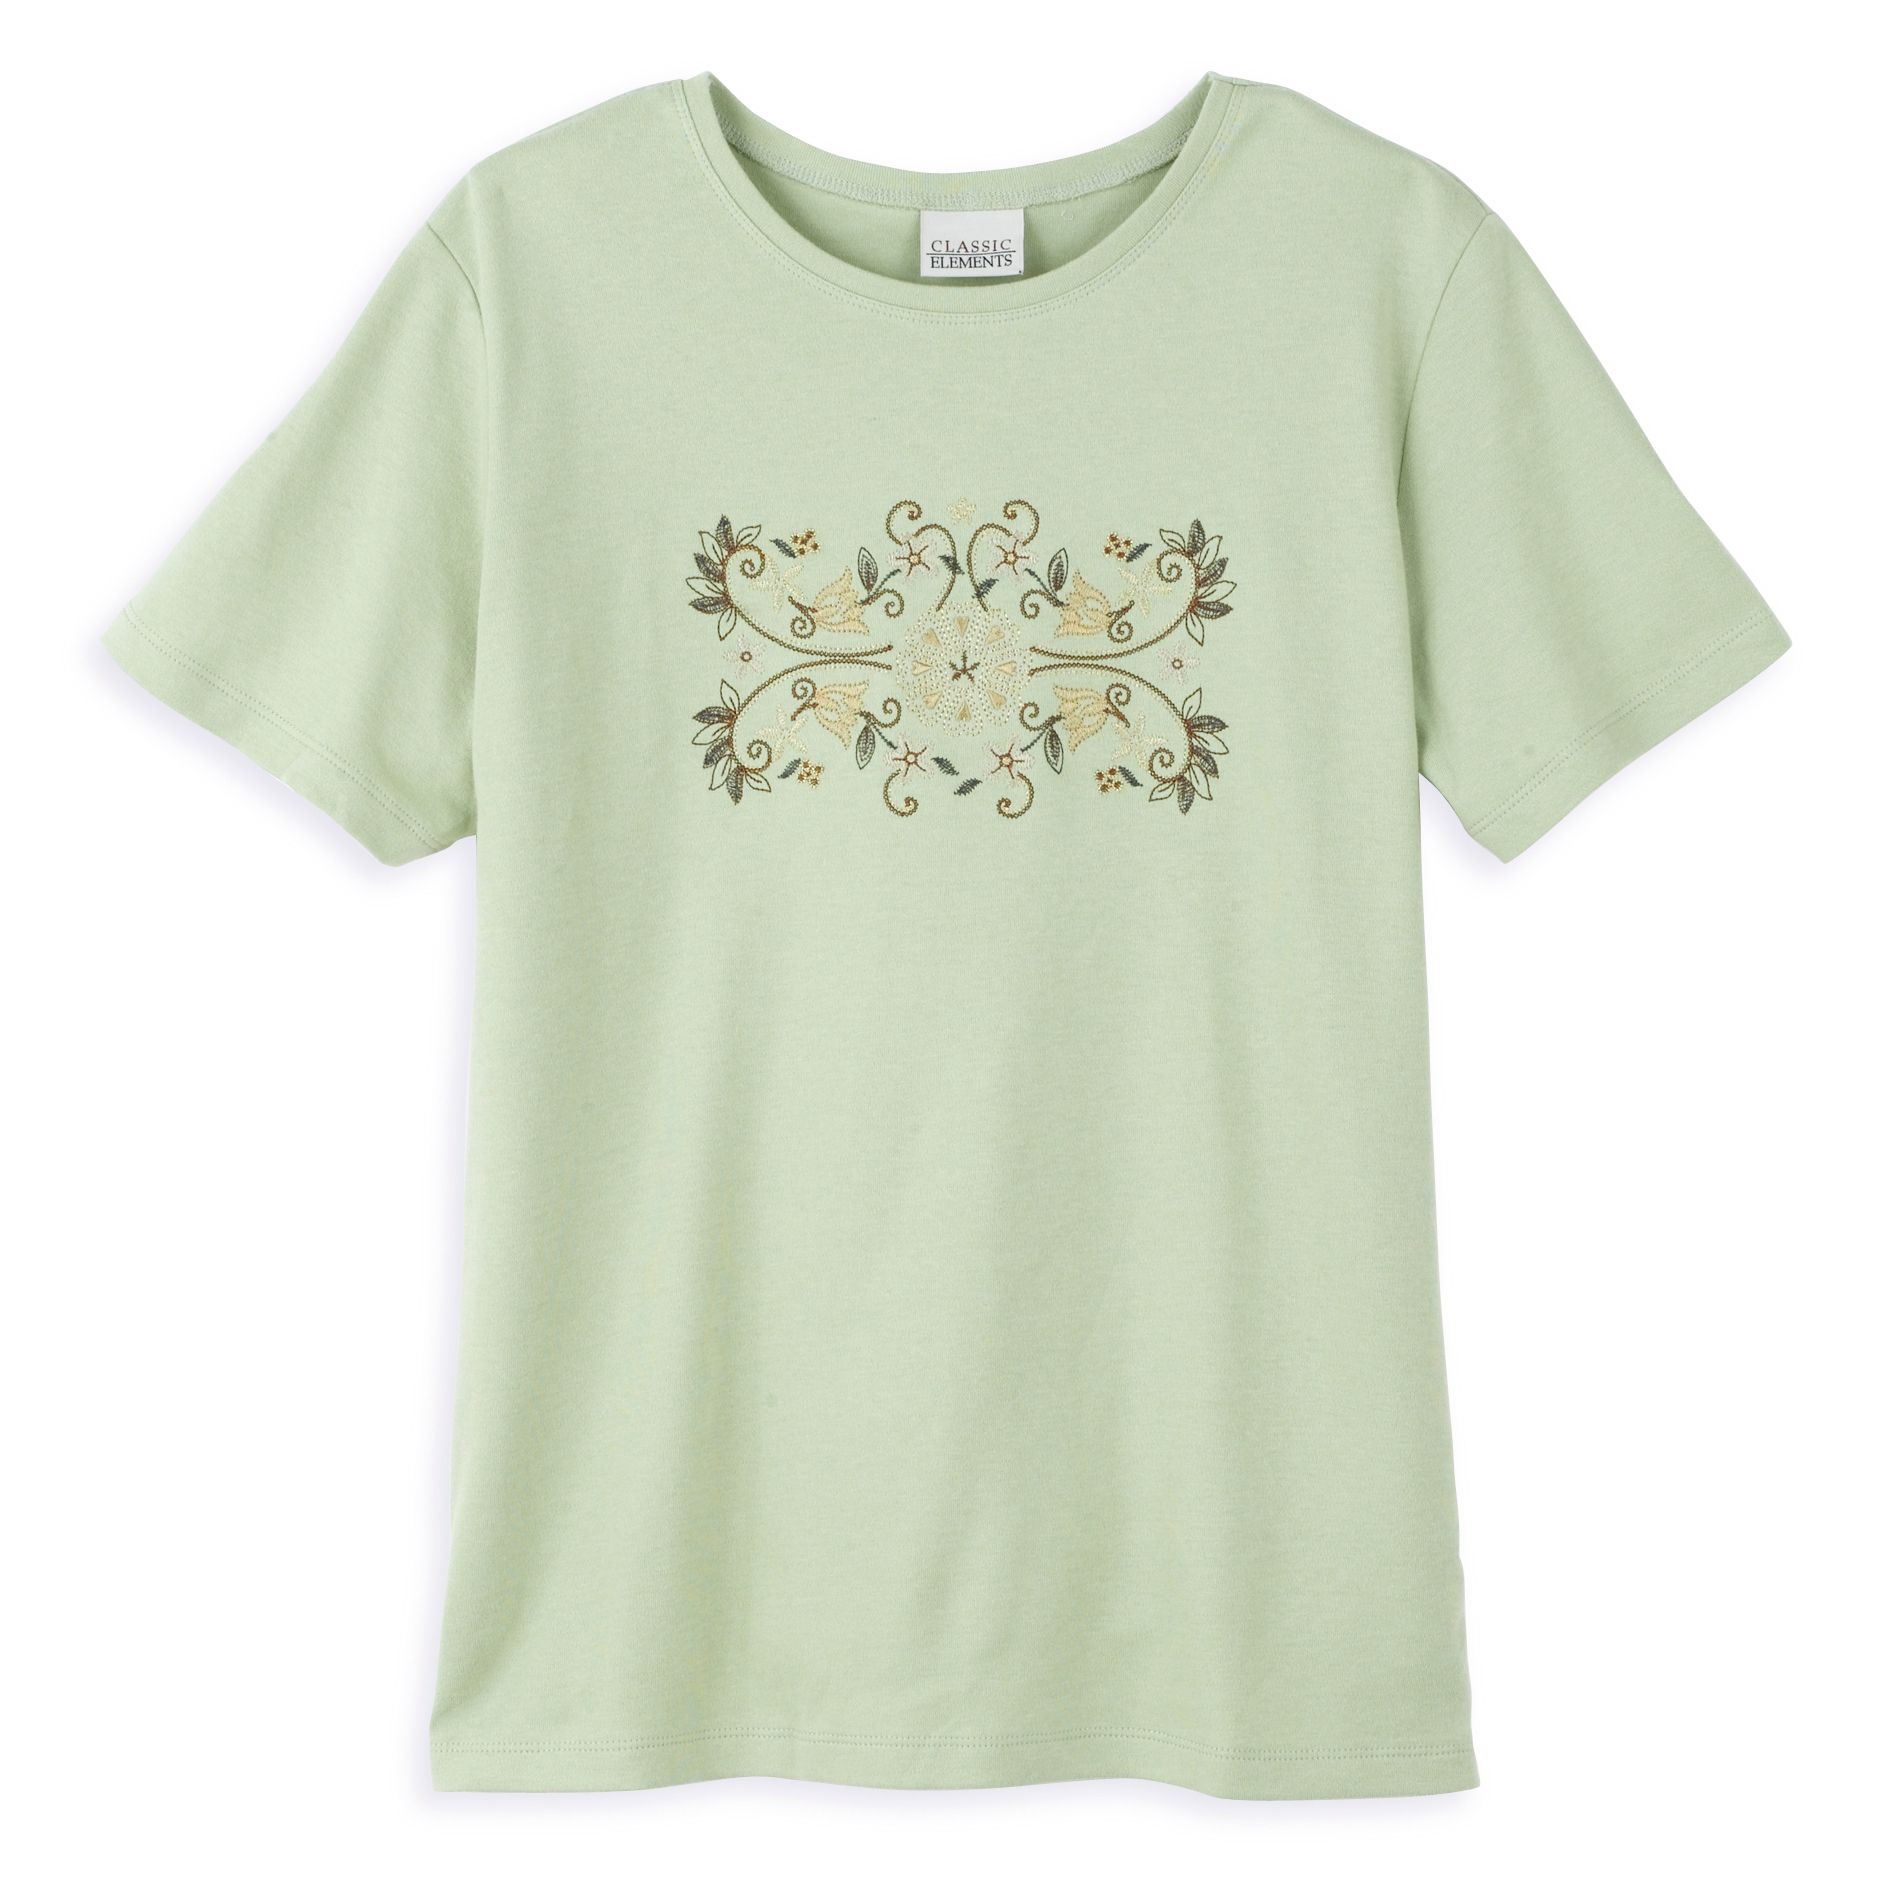 Classic Elements Petite All Over Embroidered Crew Neck